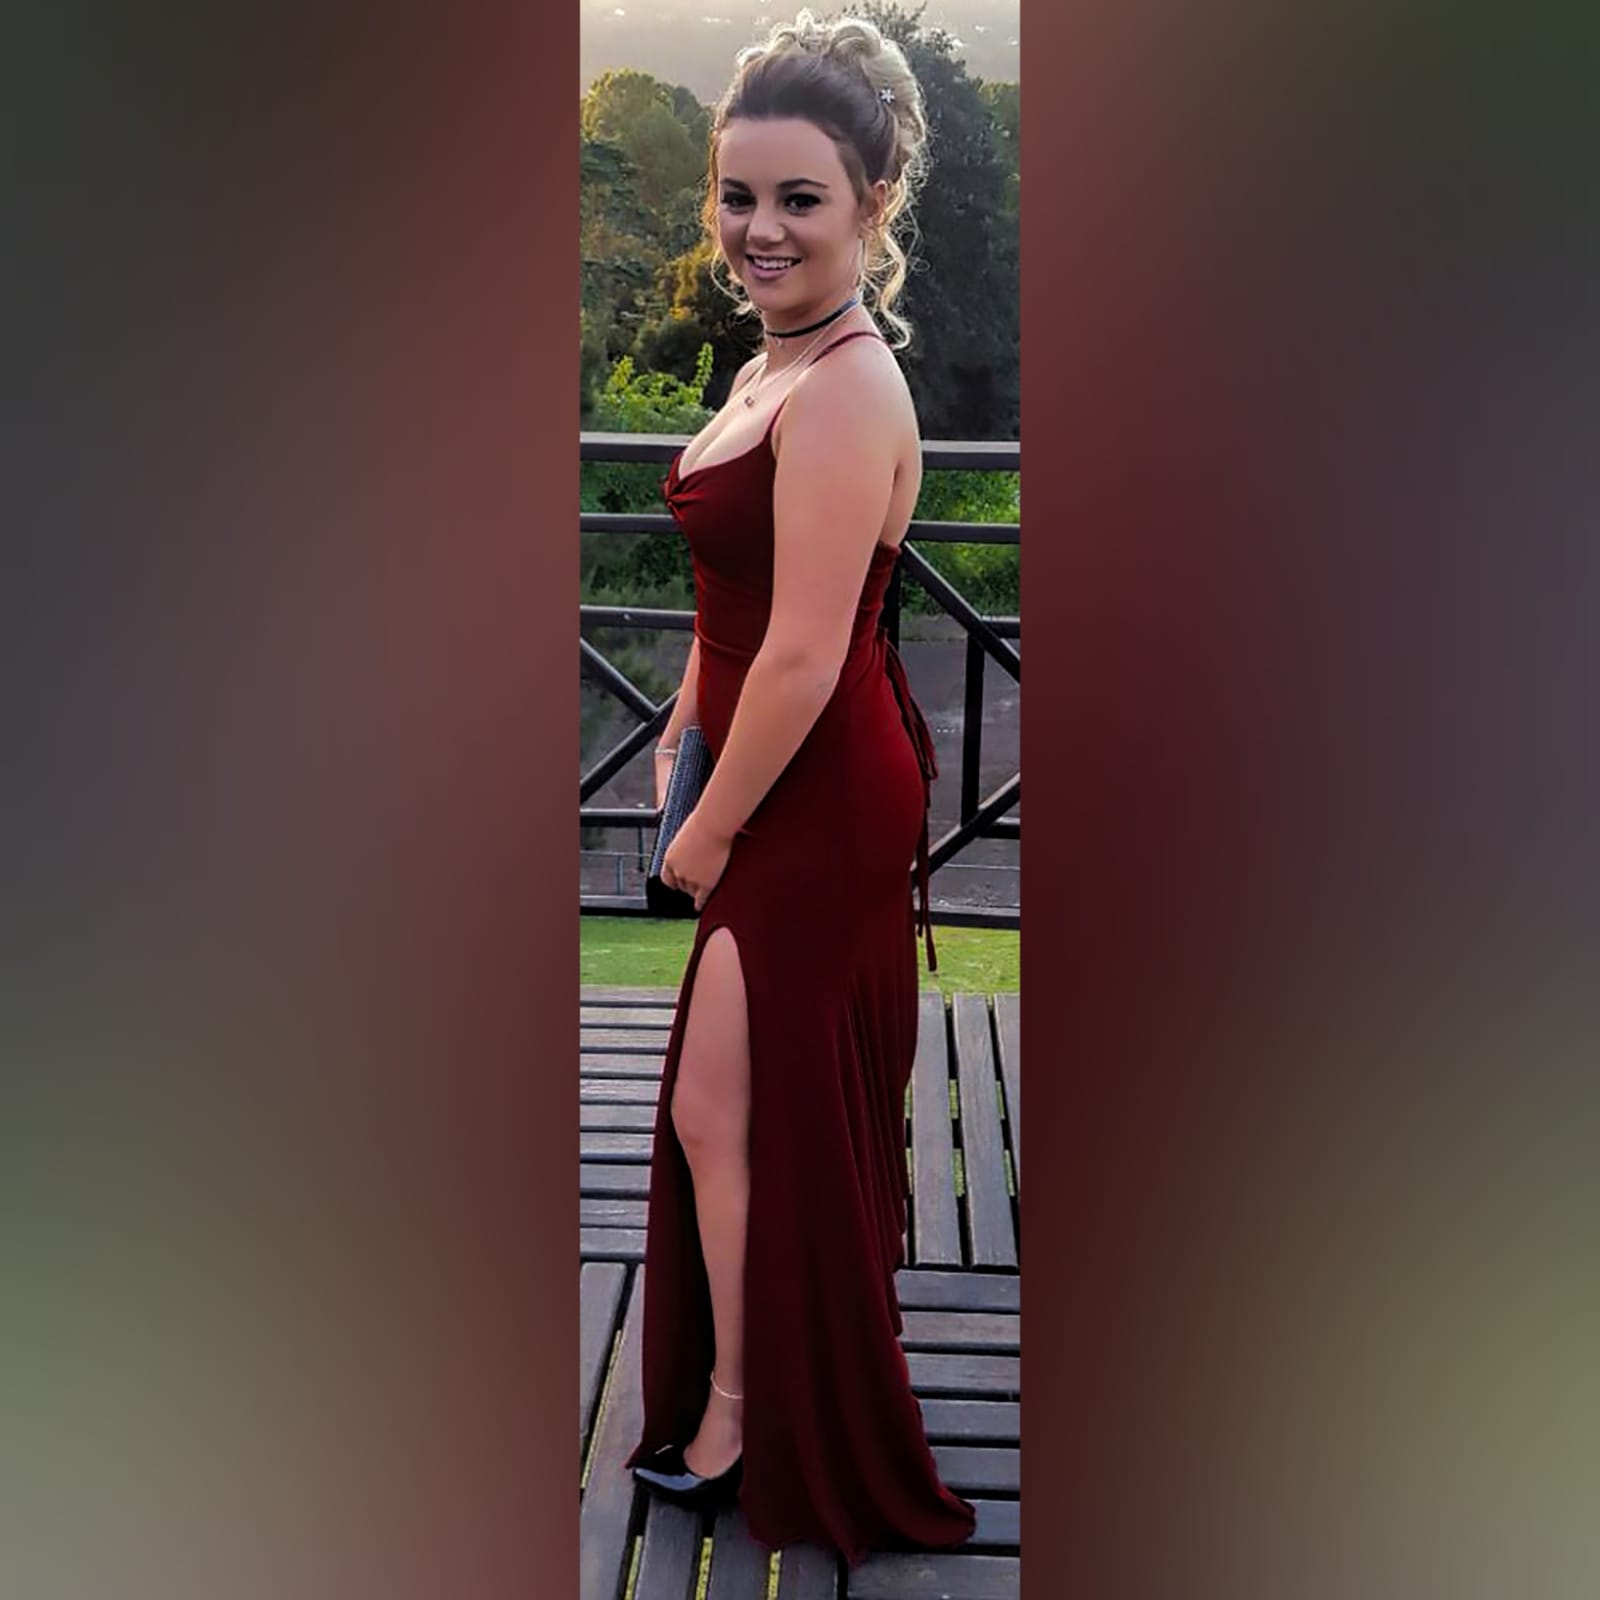 Maroon lace-up back long simple matric dance dress 1 maroon lace-up back long simple matric dance dress with thin shoulder straps, high slit and a small train. Lace-up back to adjust the fit.